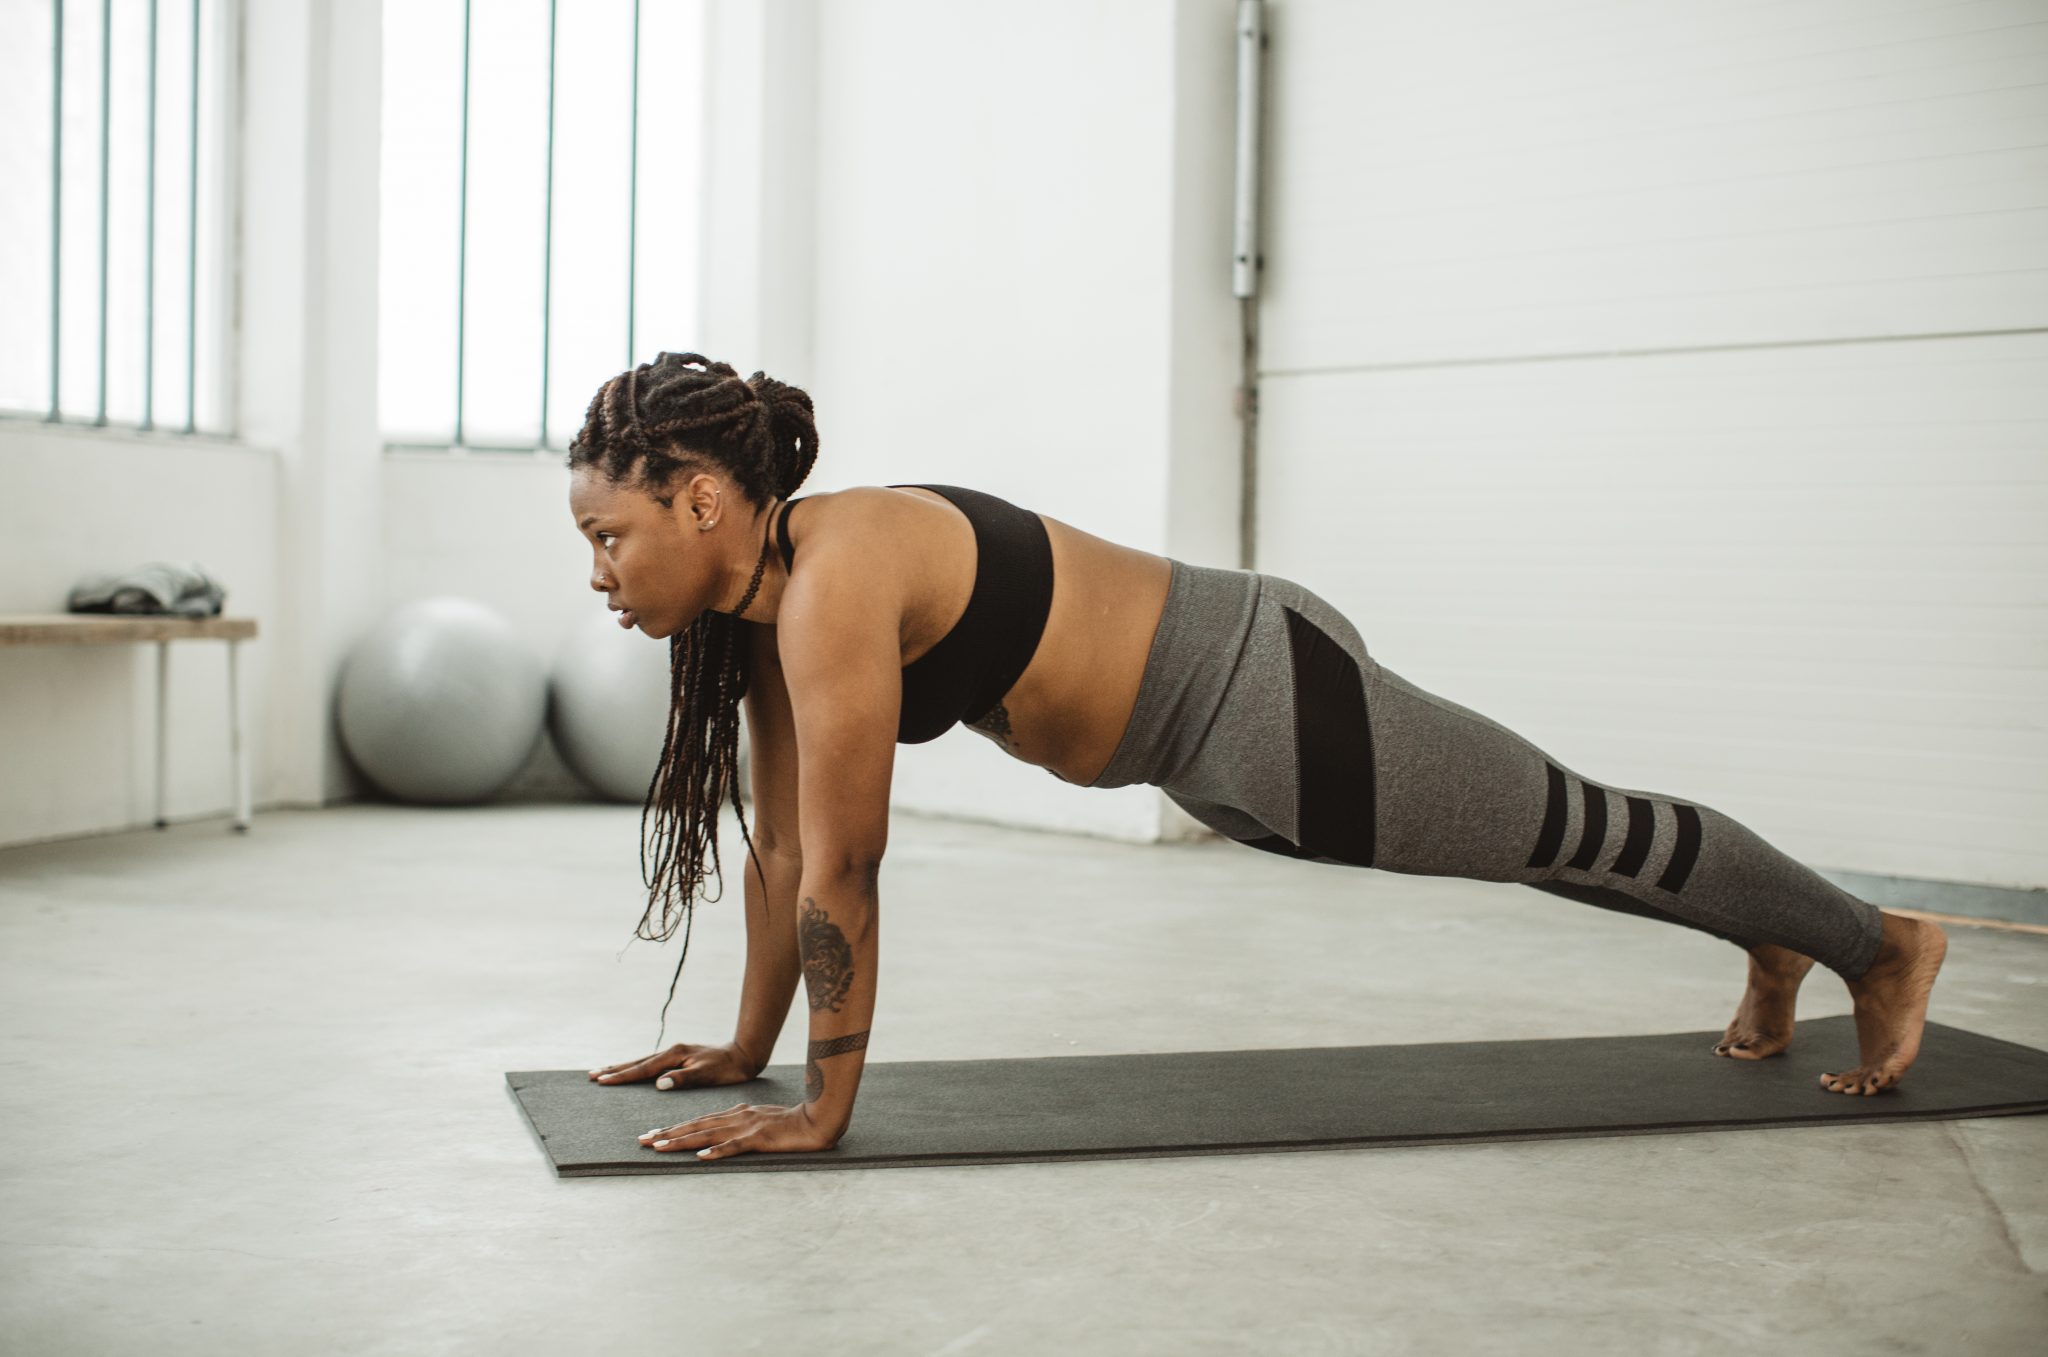 Fitness trainers: is yoga good for strength training?